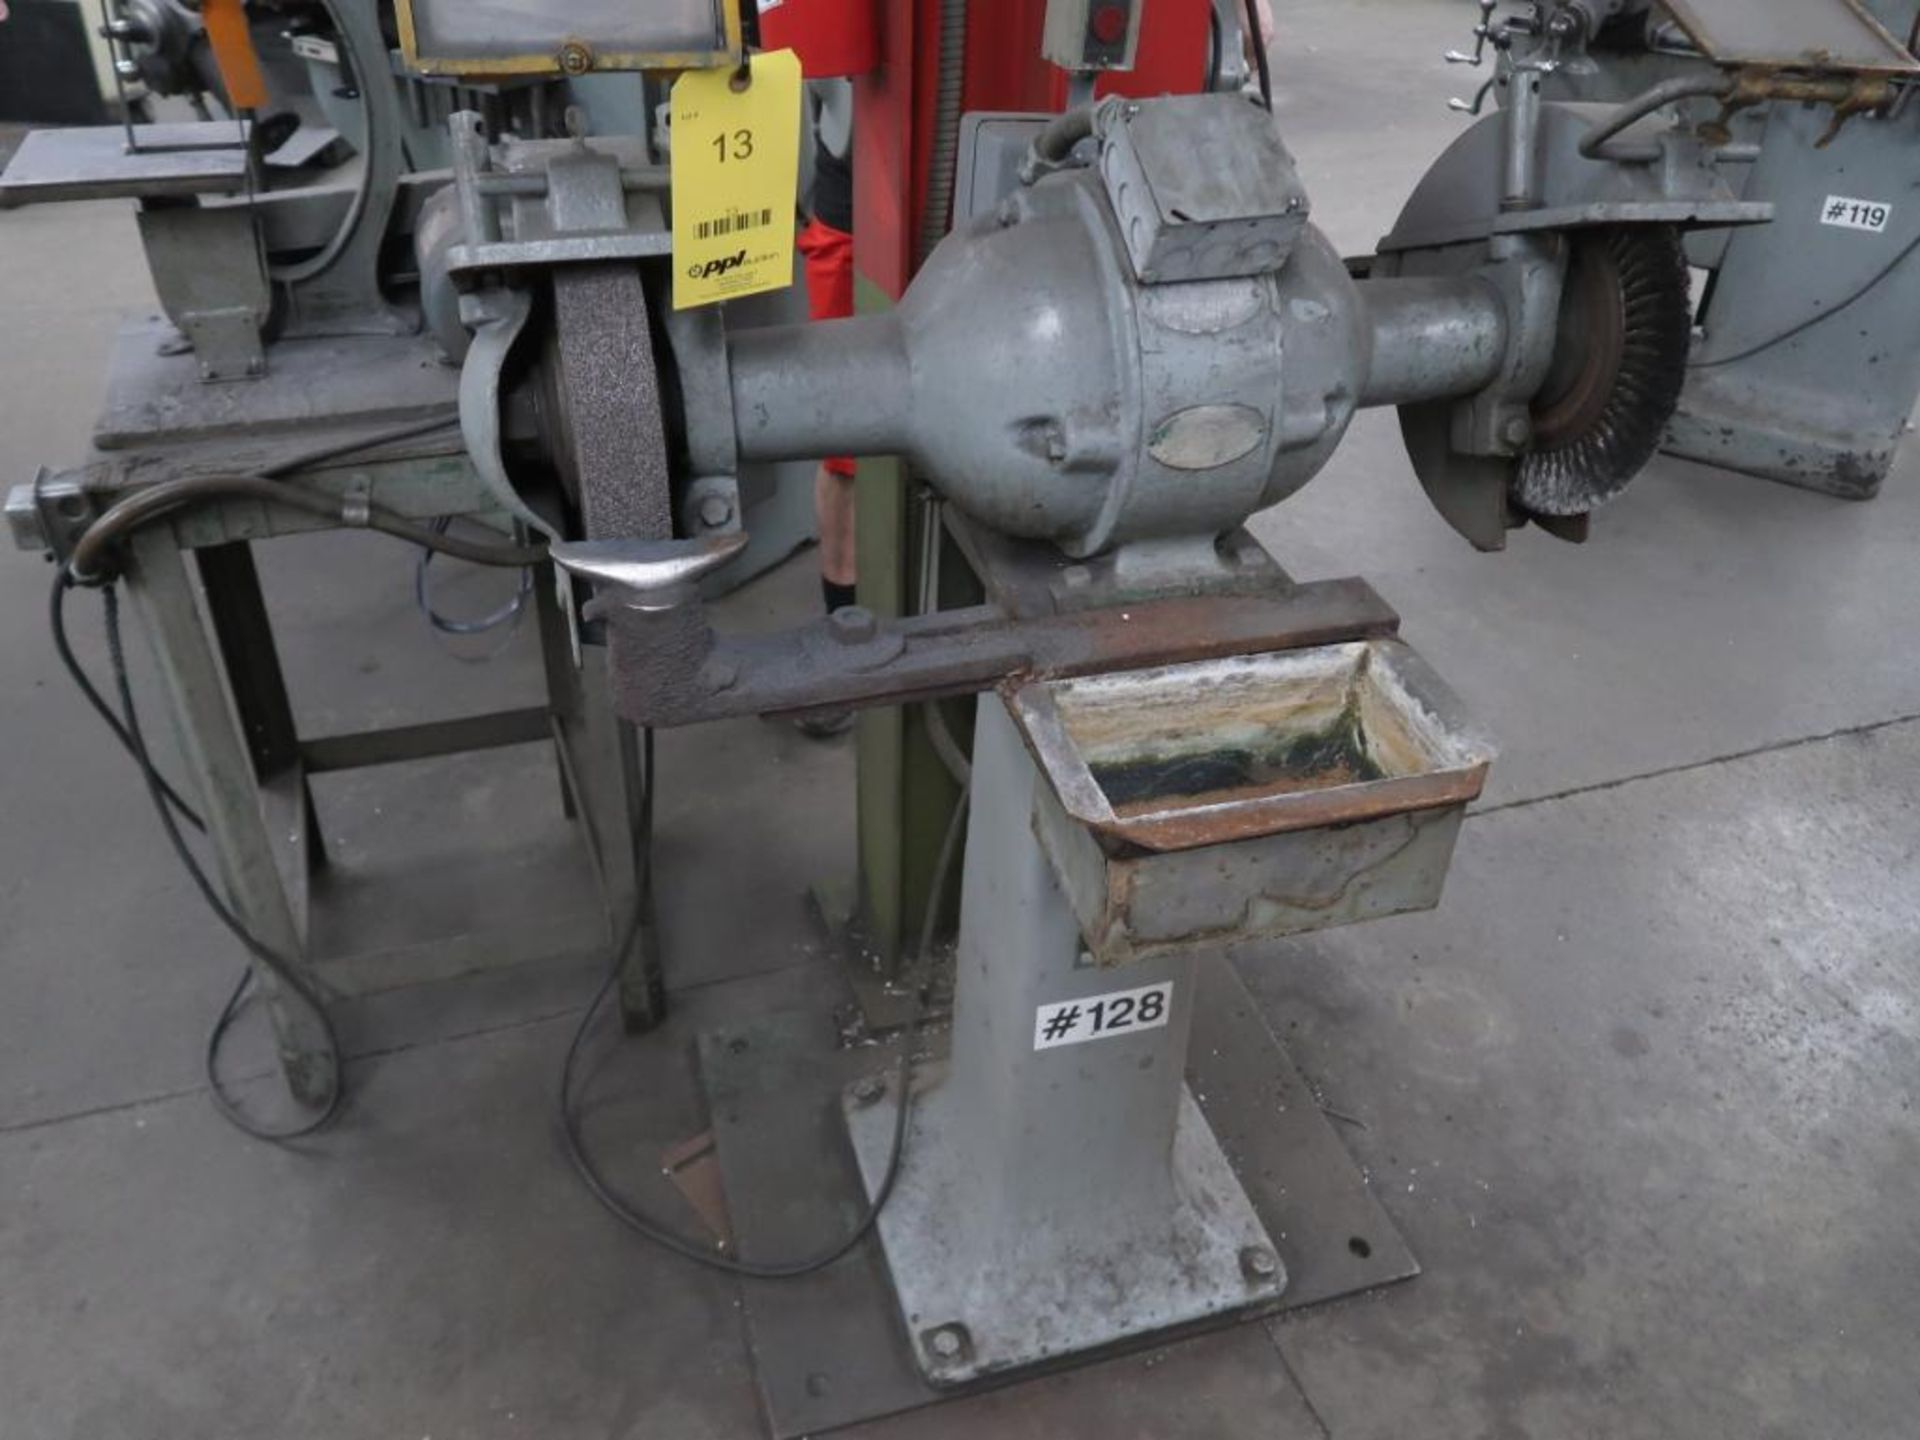 12 in. Double End Grinder, 2 HP, with Stand (#128), LOCATION: TOOL ROOM